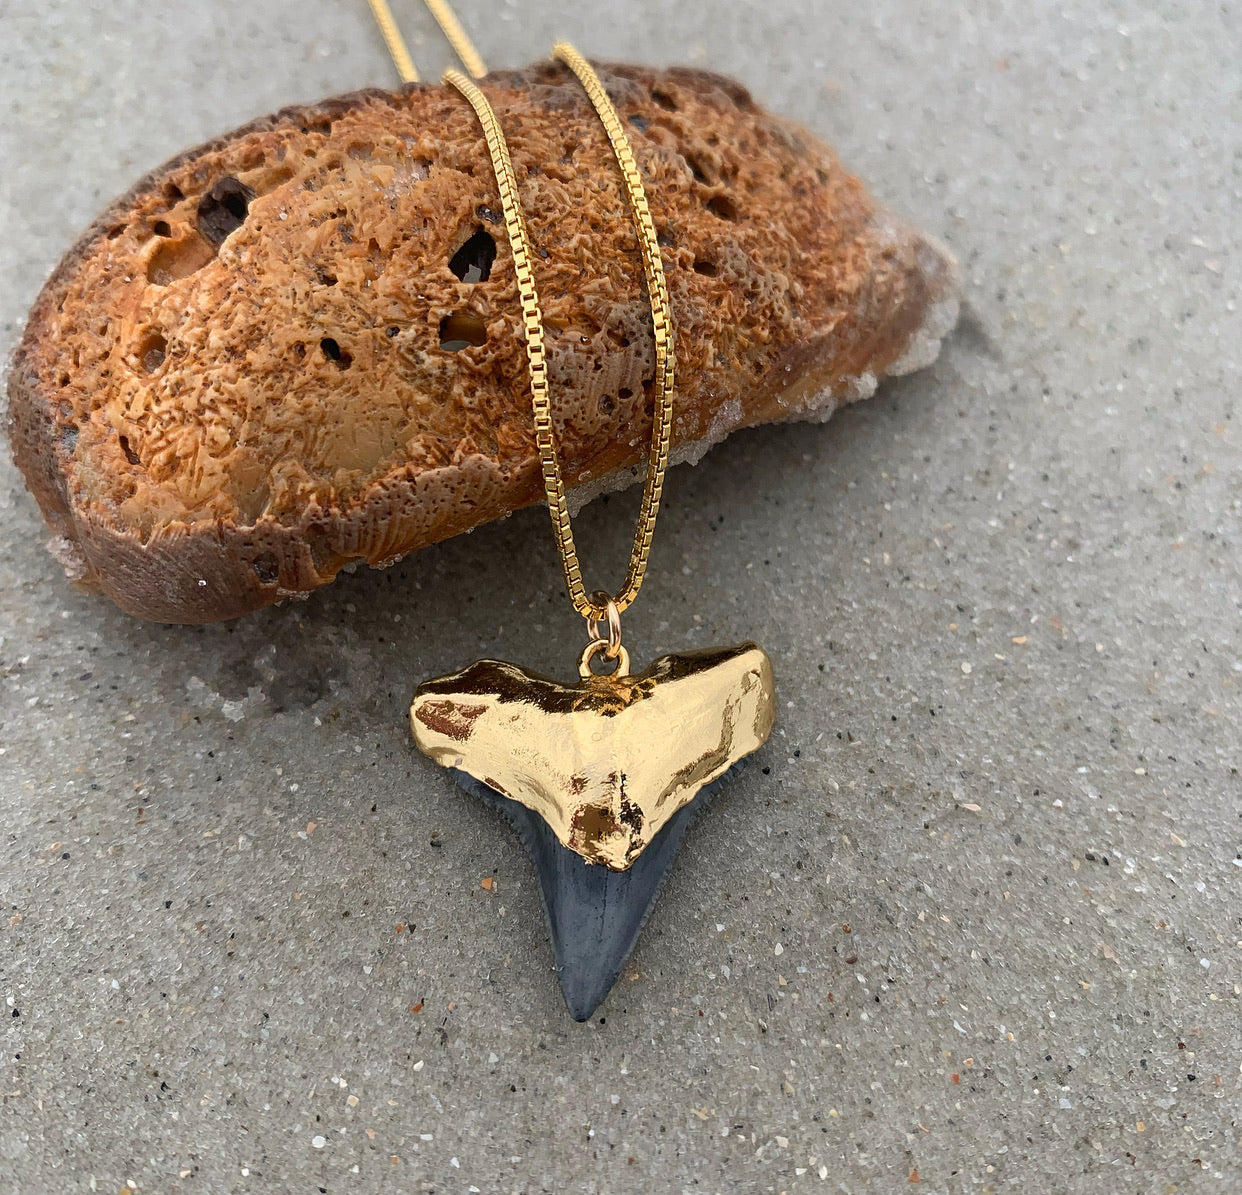 970-Shark Tooth Necklace